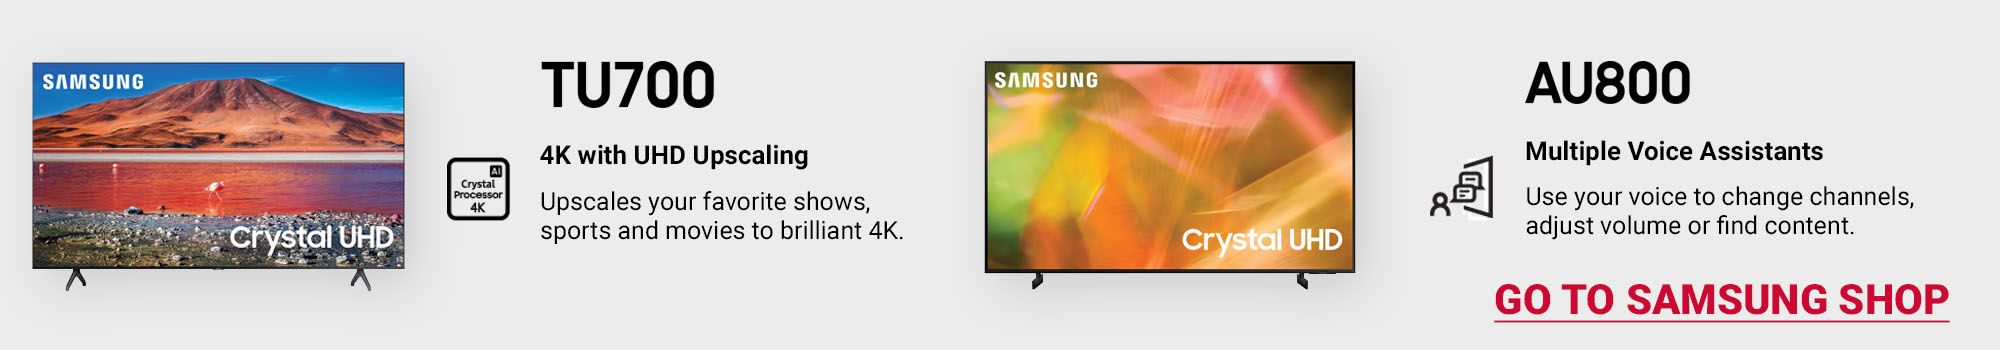 Crystal TV with 4K with UHD Upscaling and Multiple Voice Assistants. Click here to go to Samsung Shop.
